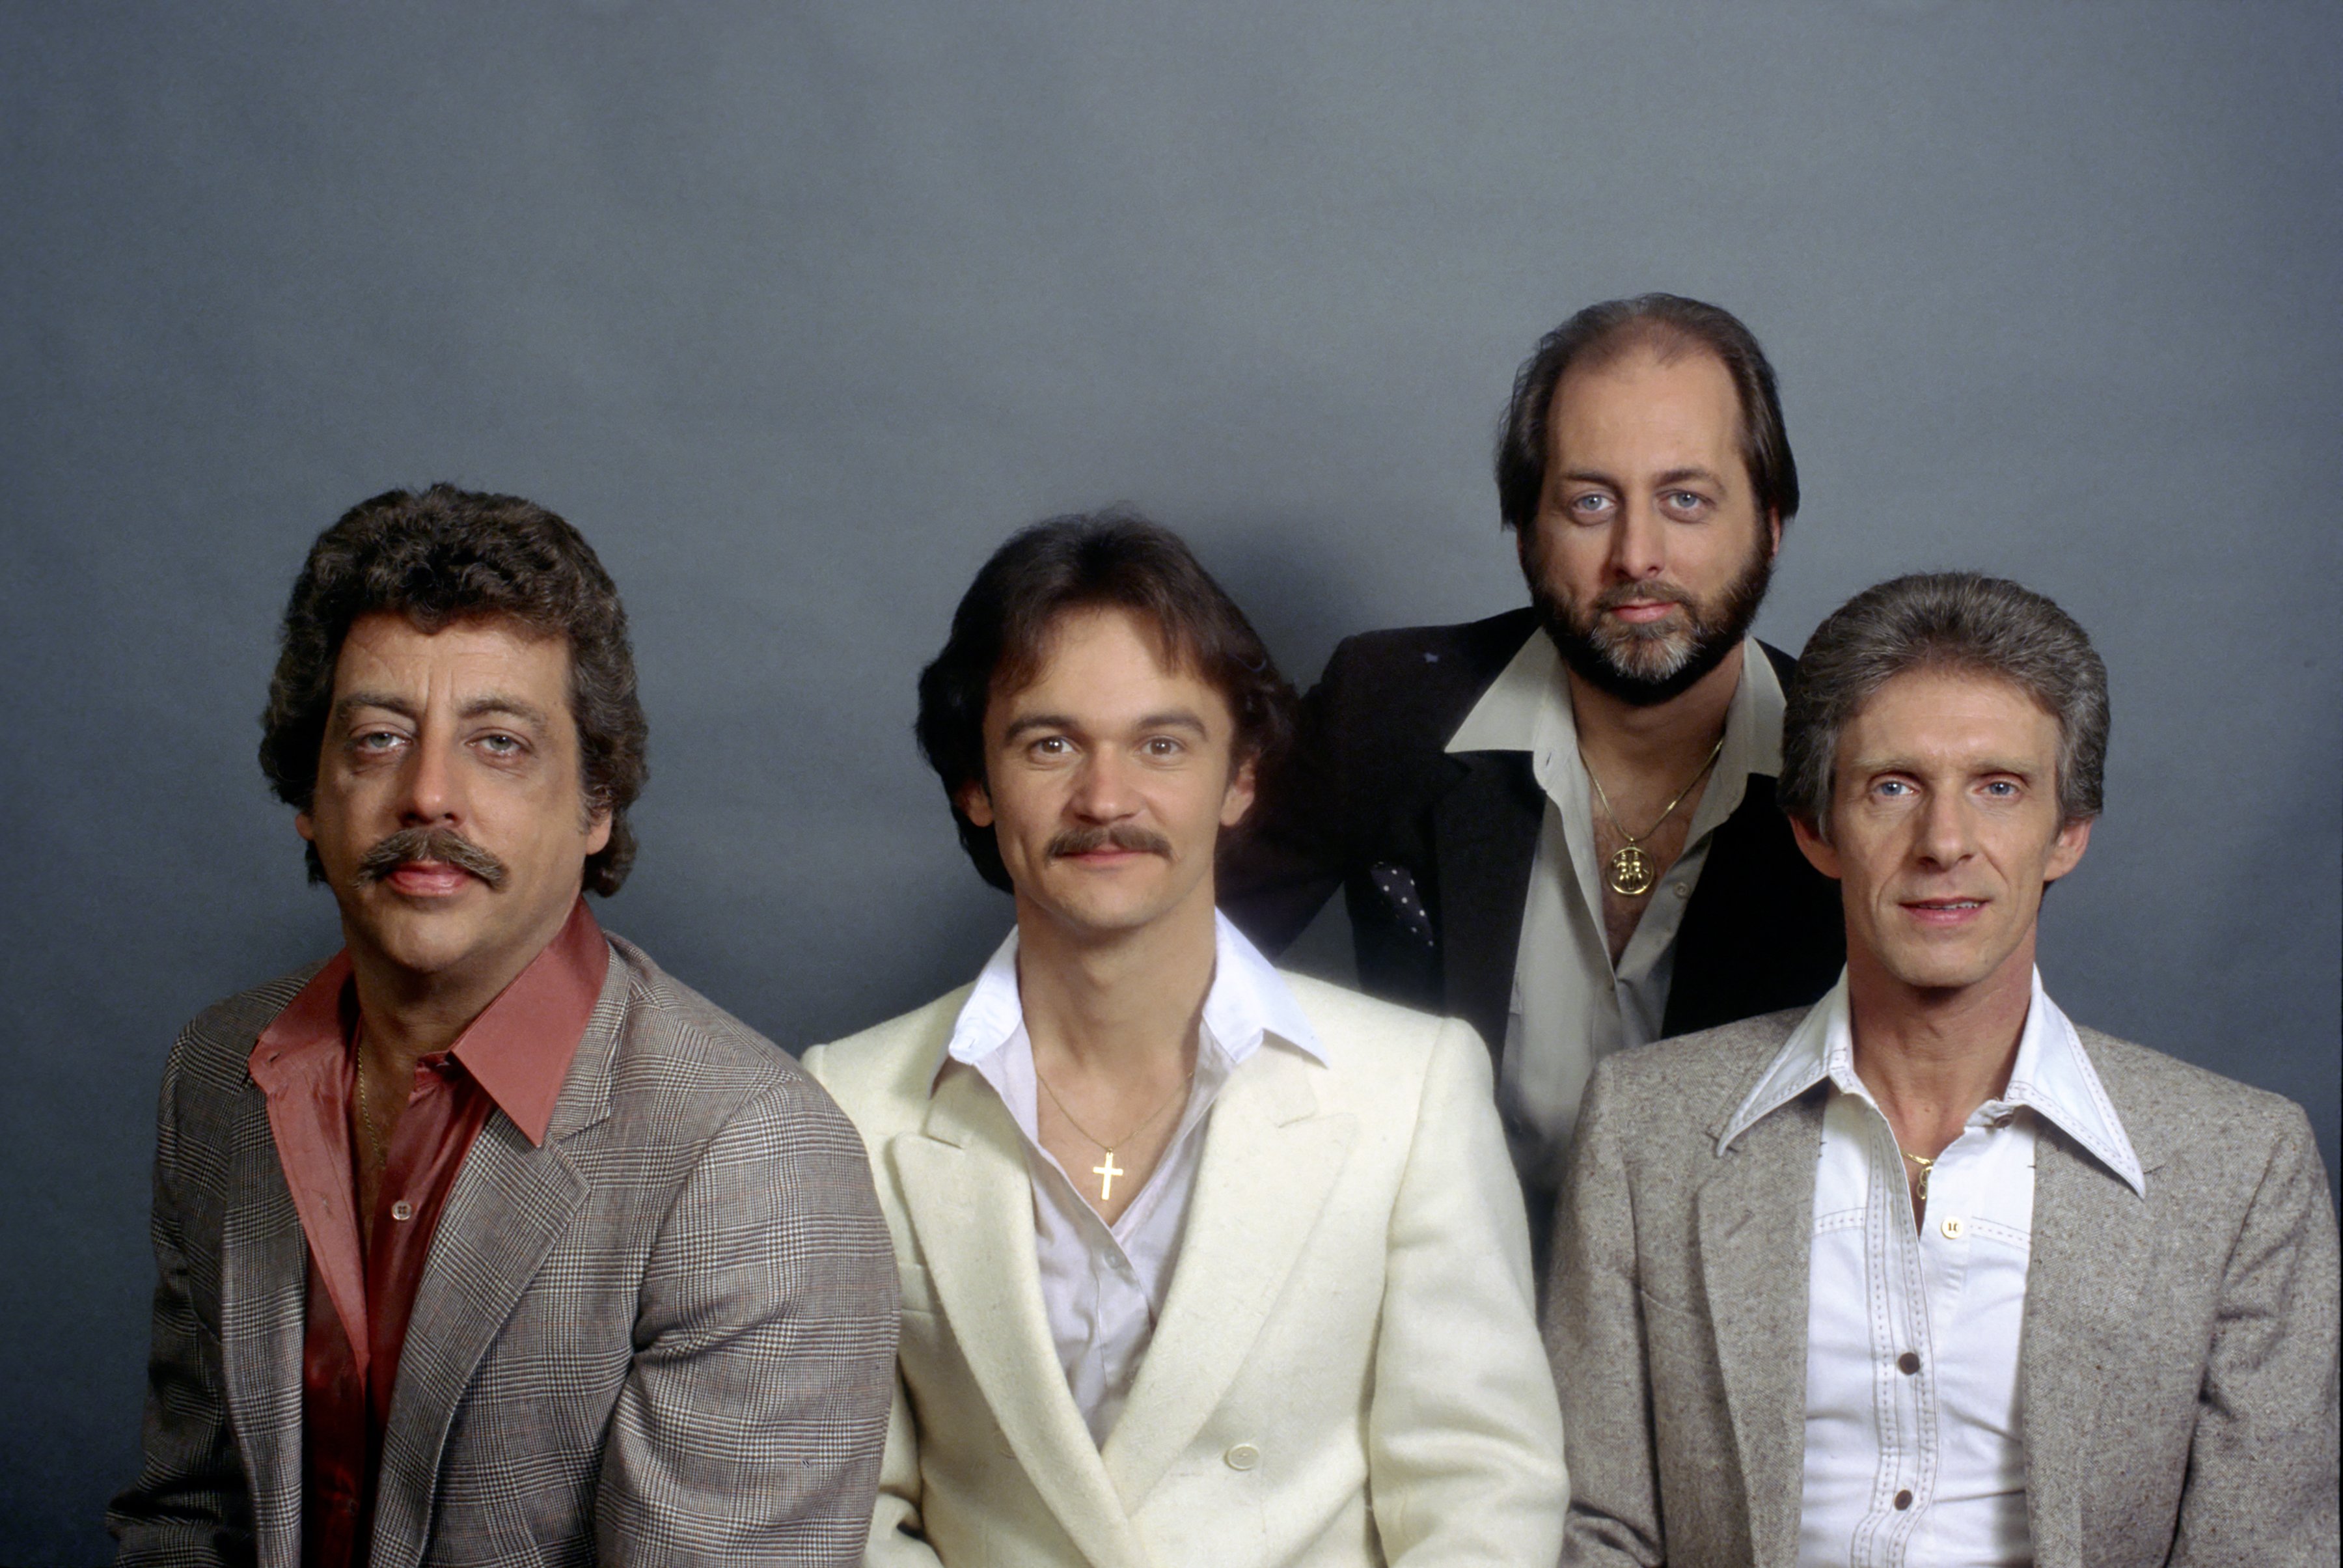 The Statler Brothers members from left to right: Harold Reid, Jimmy Fortune, Don Reid and Phil Balsley posing for a photo in 1970 | Photo: Getty Images